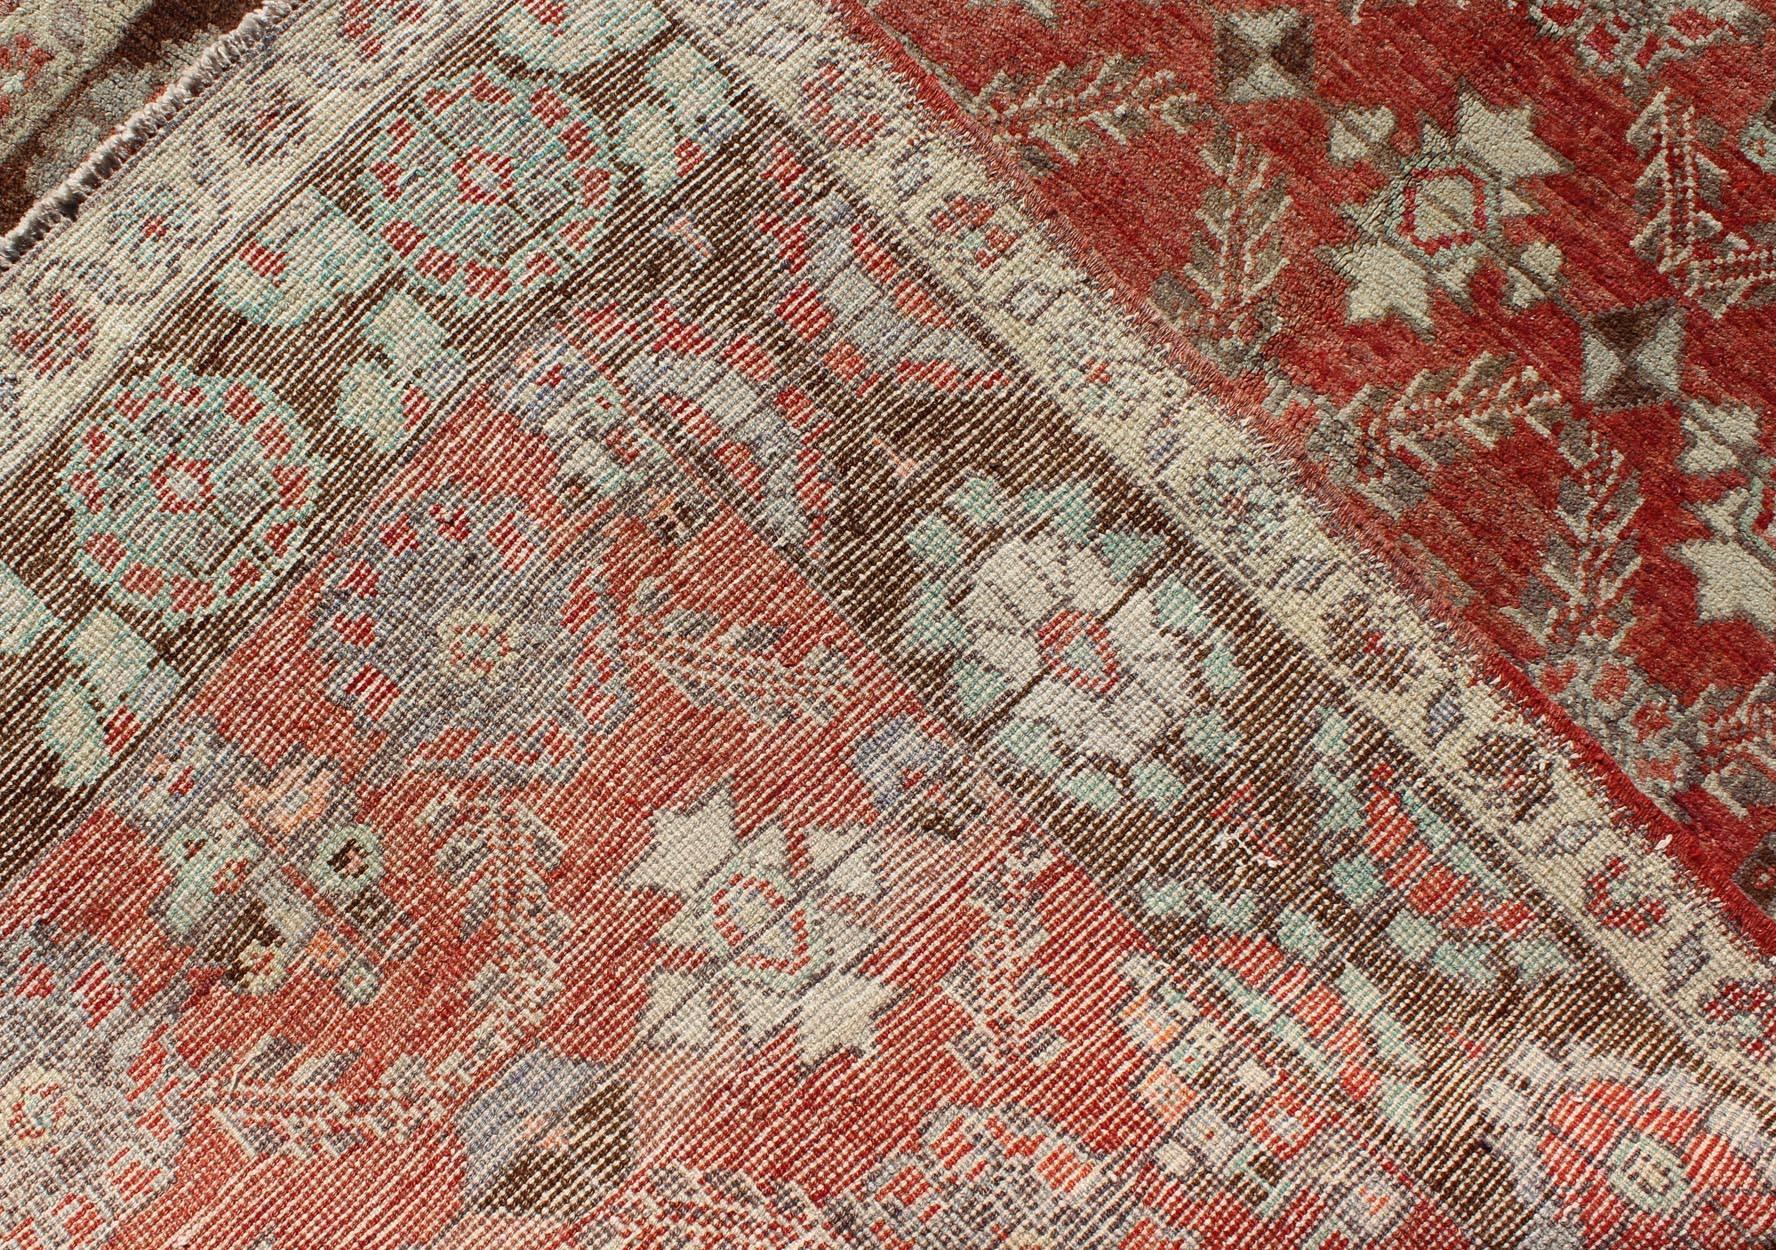 20th Century Oushak Rug With Interconnected Floral Designs in Red, Brown & Light Green For Sale